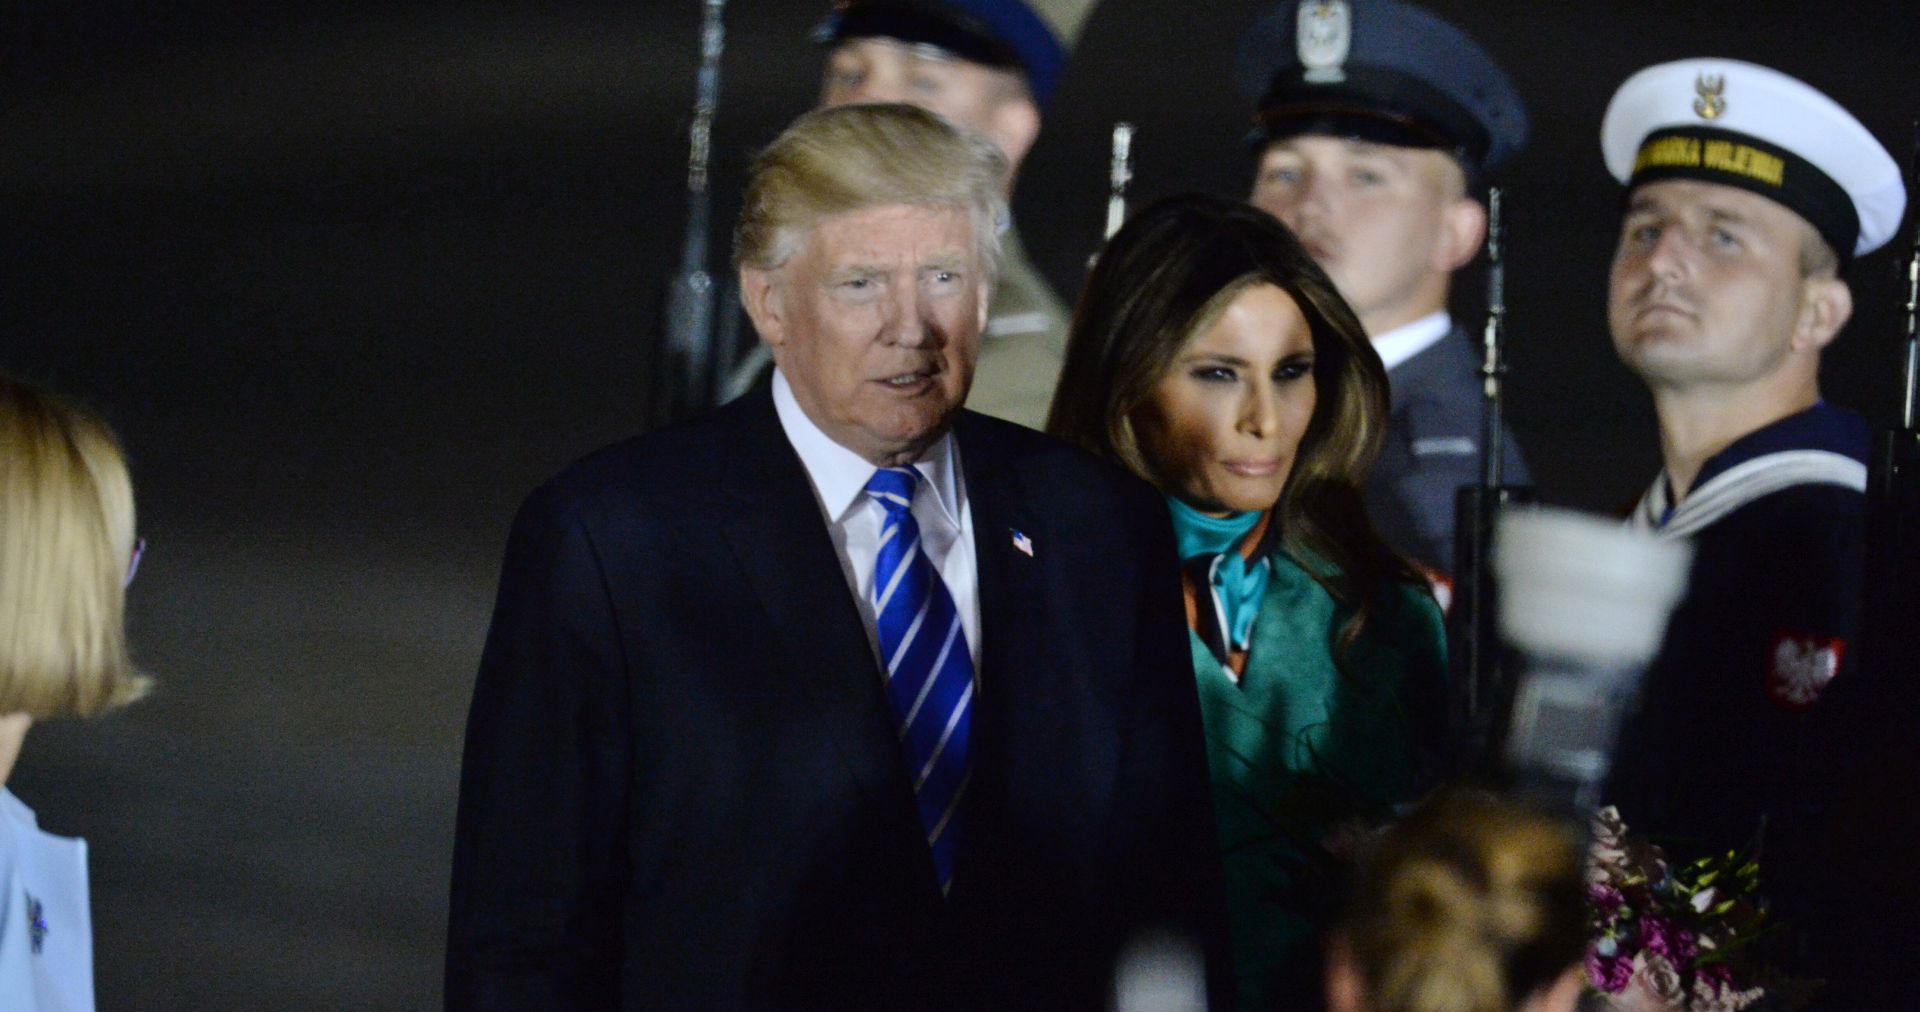 epa06068751 US President Donald J. Trump (C), First Lady Melania Trump (C-R) arrive at Okecie Airport in Warsaw, Poland, 05 July 2017.  US President Donald J. Trump is on a two-day visit in Poland. He will meet Polish President Andrzej Duda as well as speak to the leaders of Three Seas Initiative nations and address the Polish people at Warsaw's Krasinski Square.  EPA/JACEK TURCZYK POLAND OUT